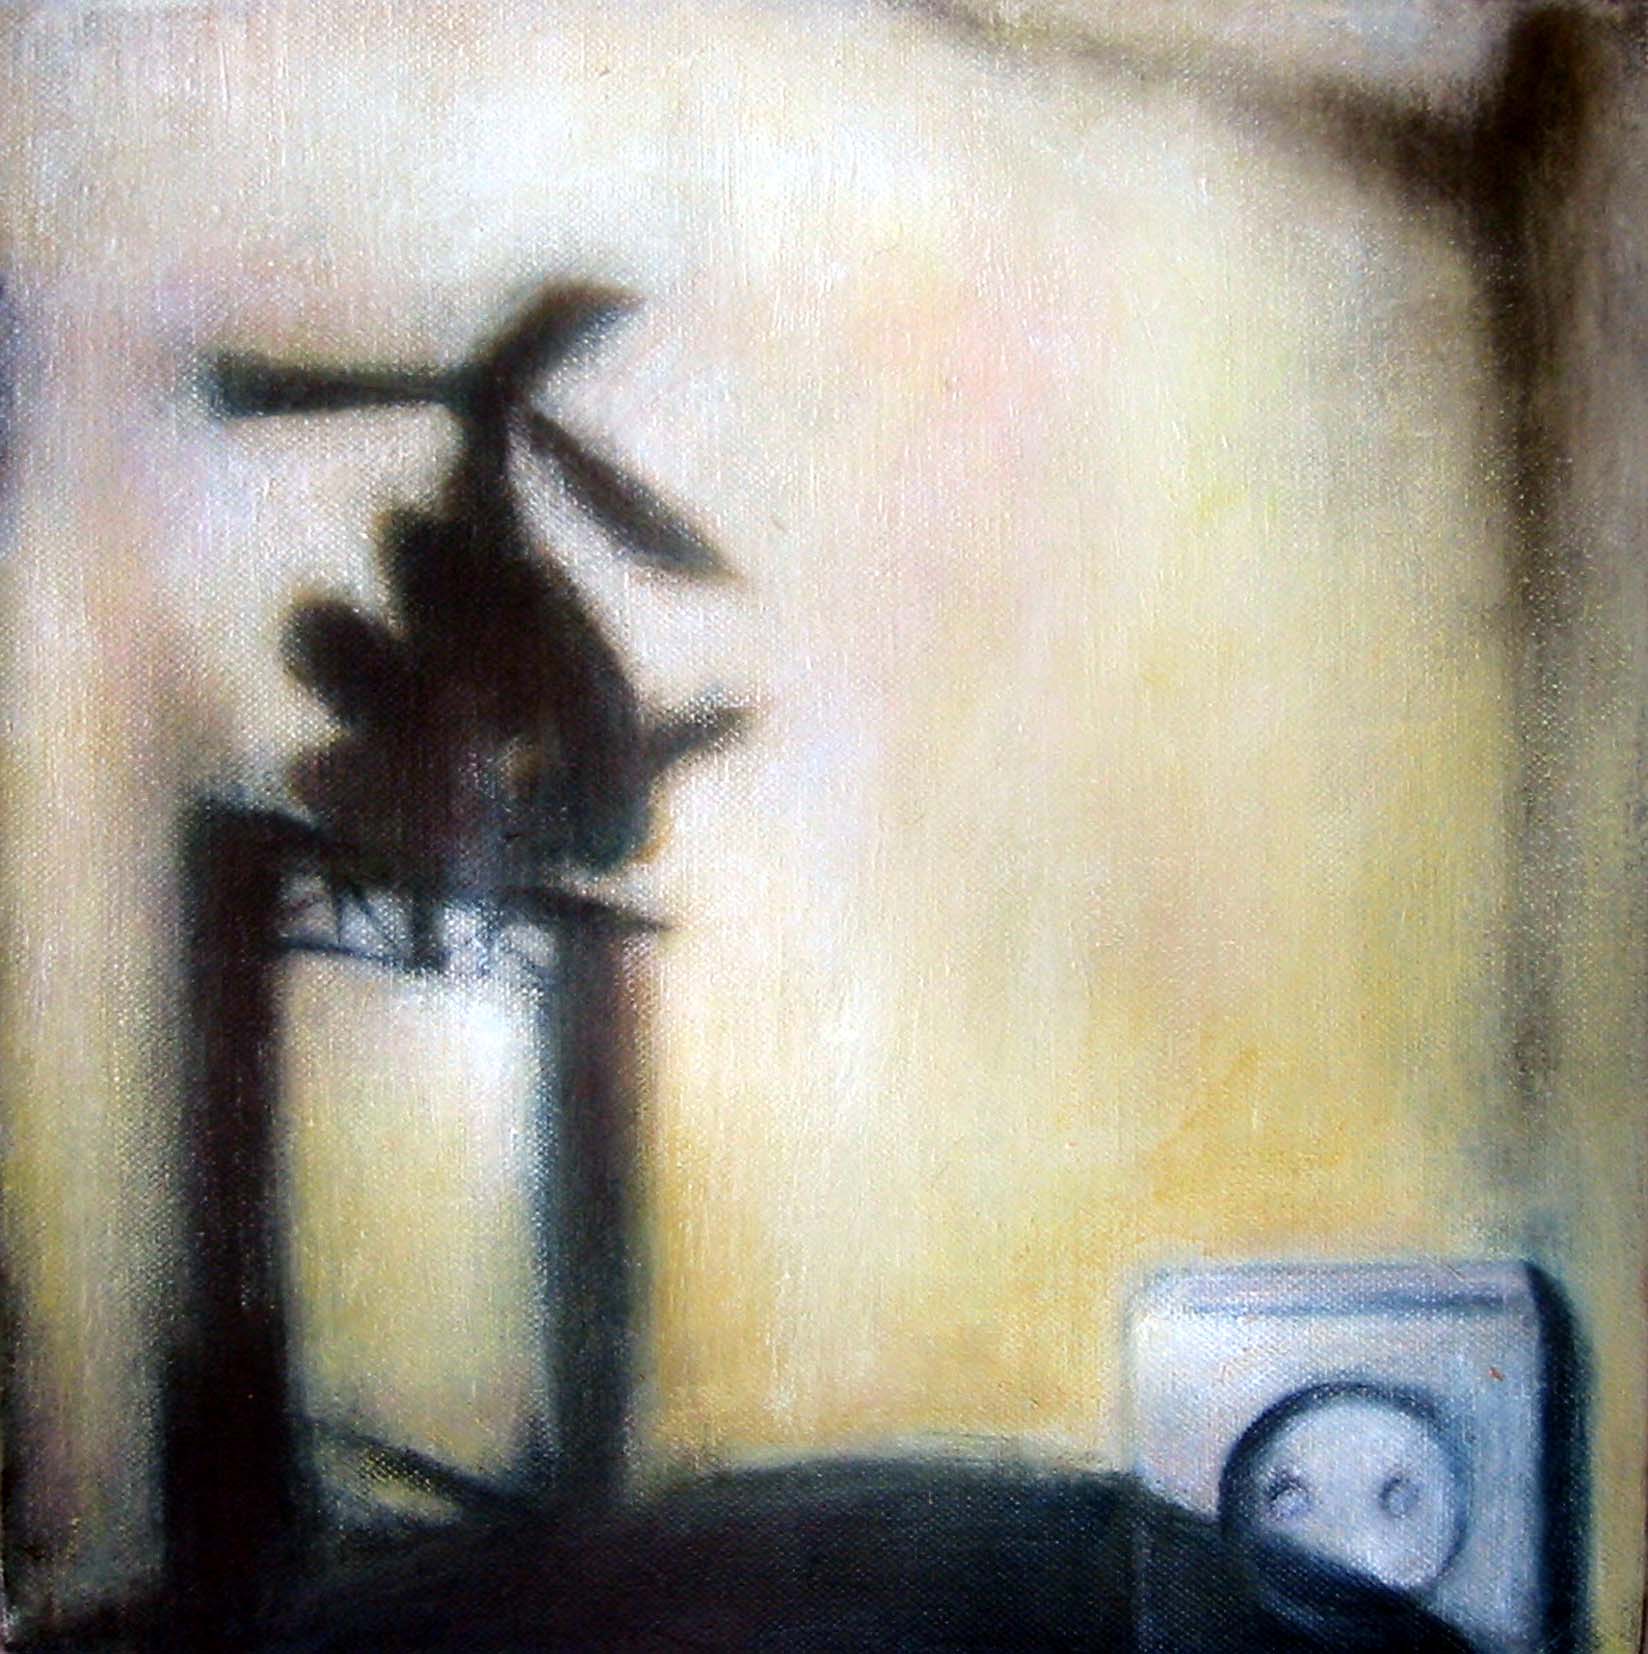   Interior from children's playroom  Oil on canvas  30 x 30 cm 2005  